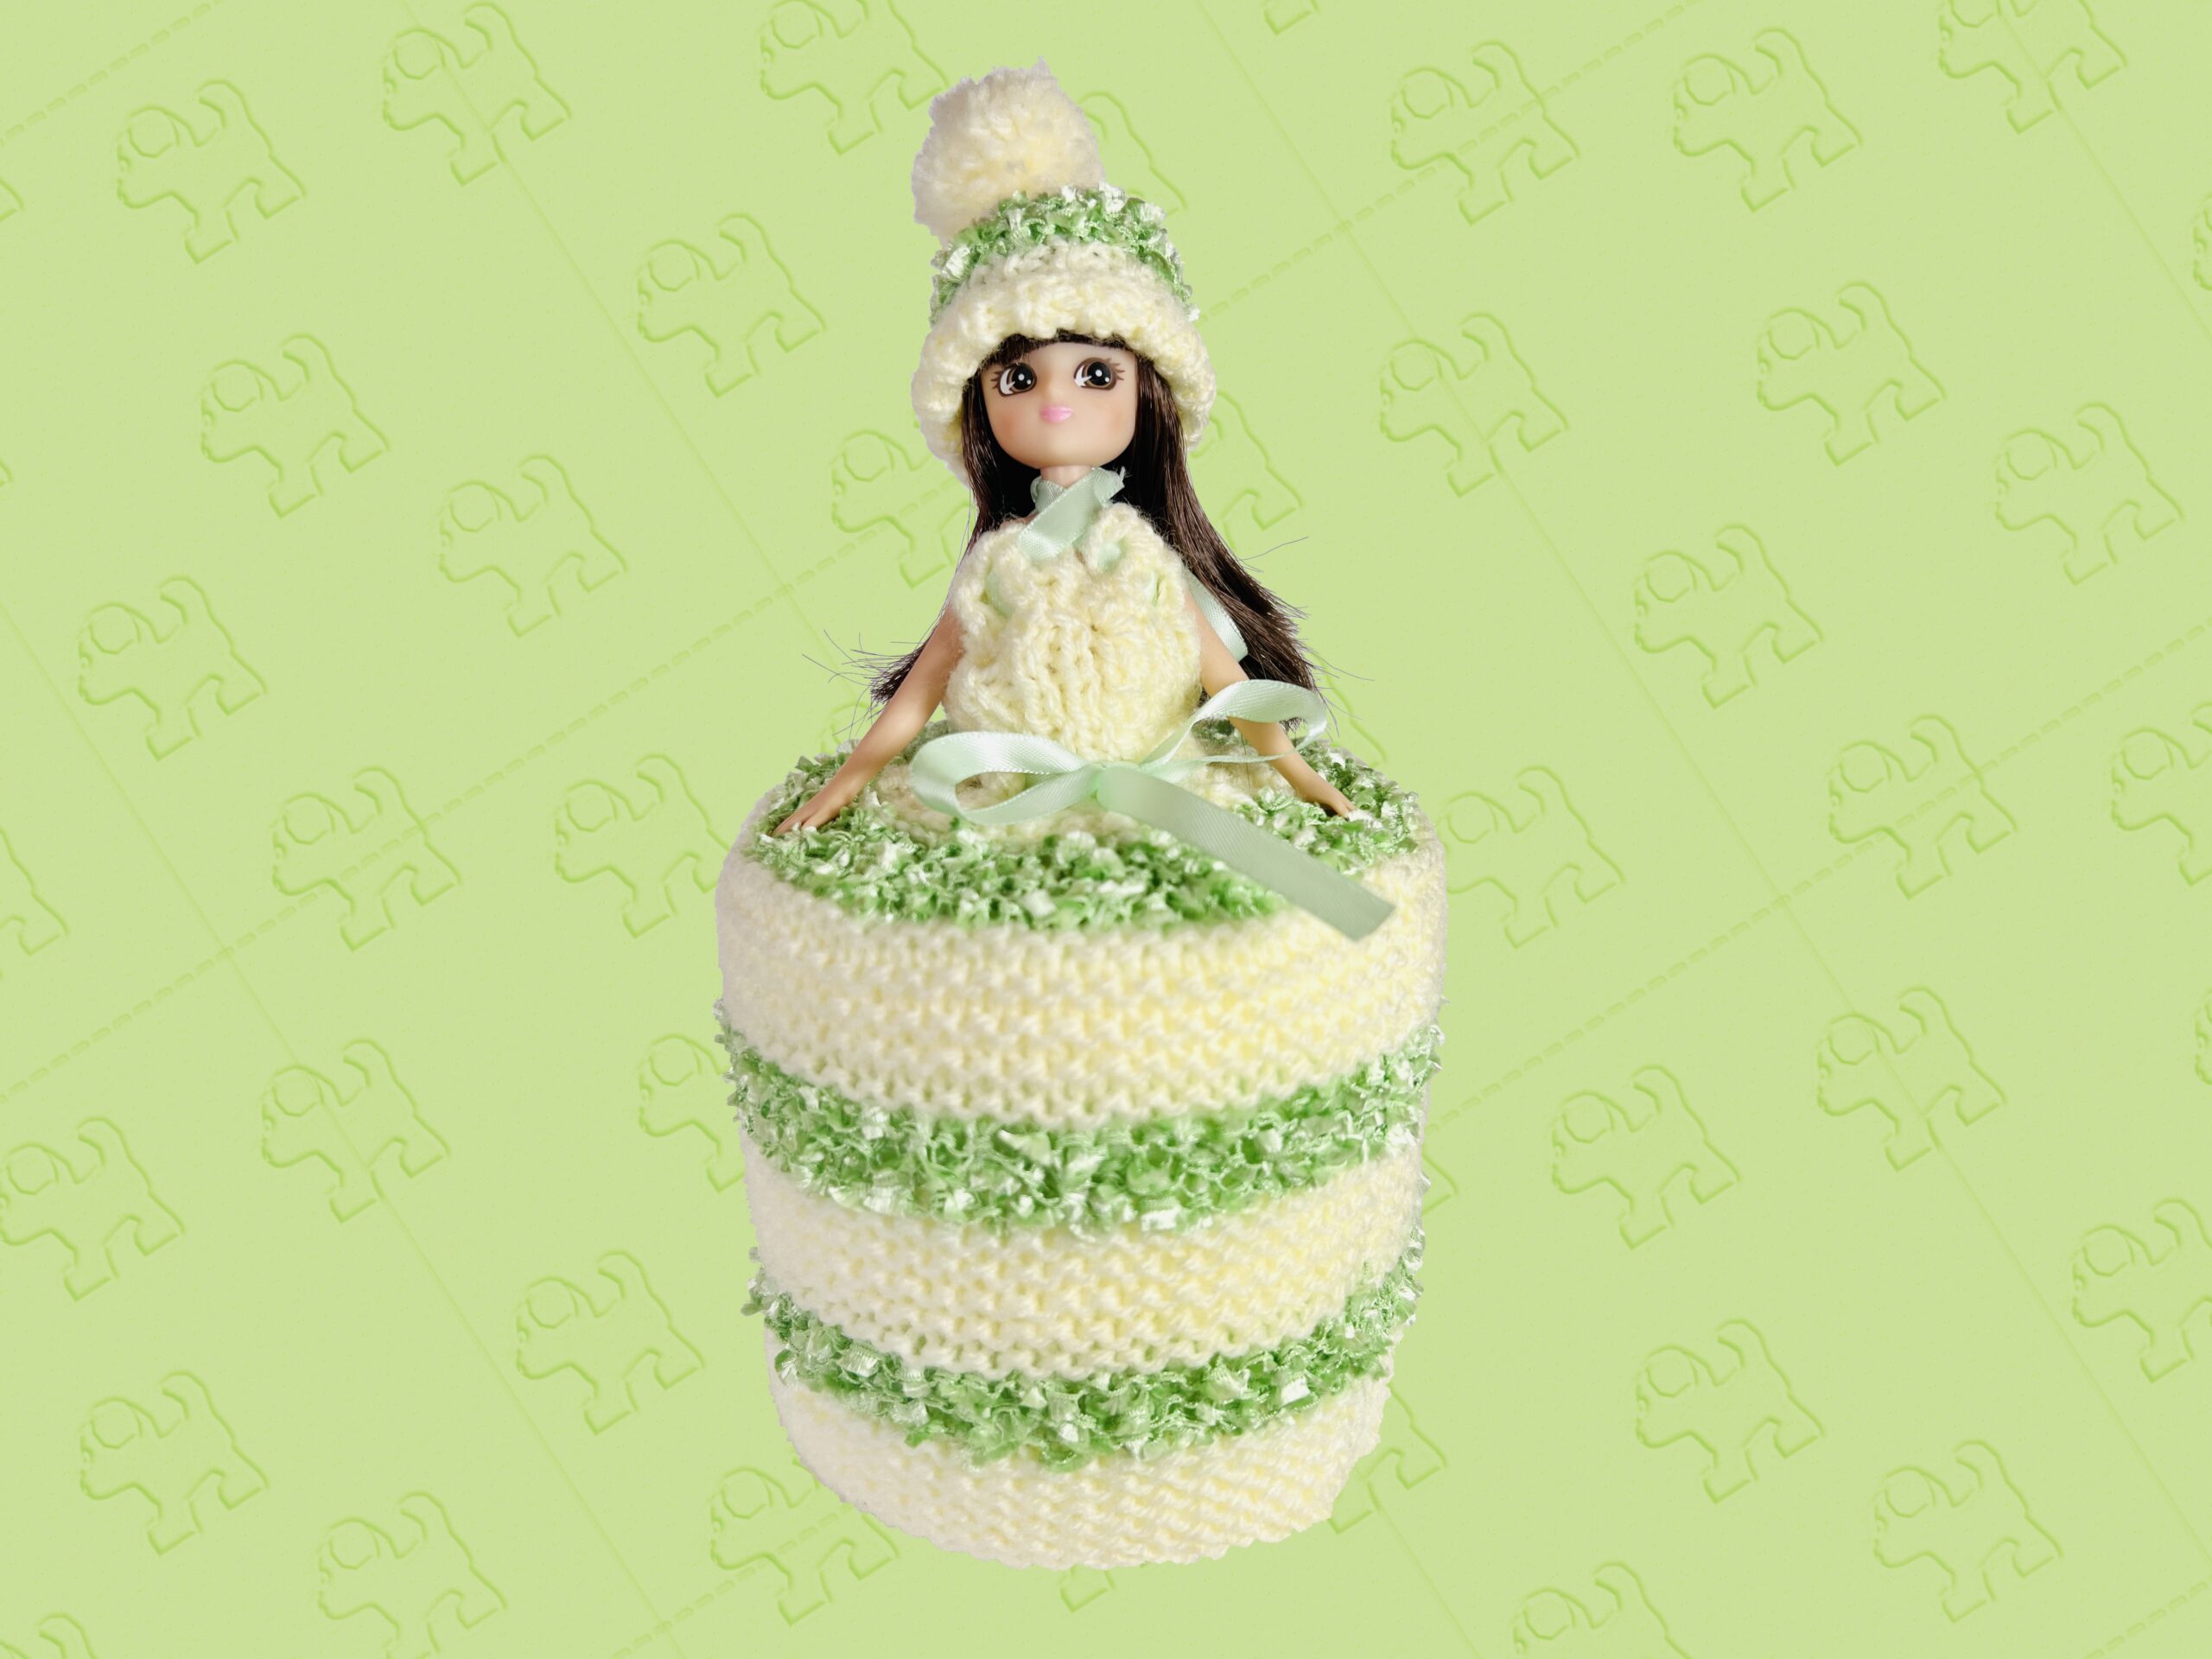 Brunette doll wearing a pale yellow and lime knitted toilet roll dress.